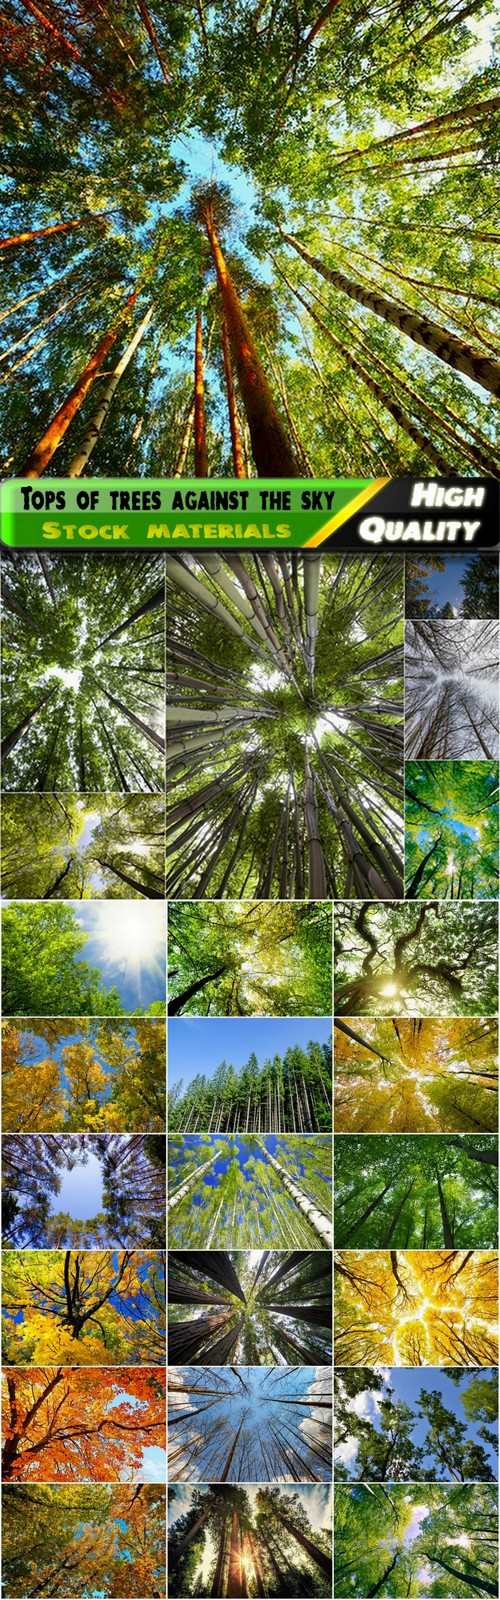 Tops of trees against the sky in the forest - 25 HQ Jpg